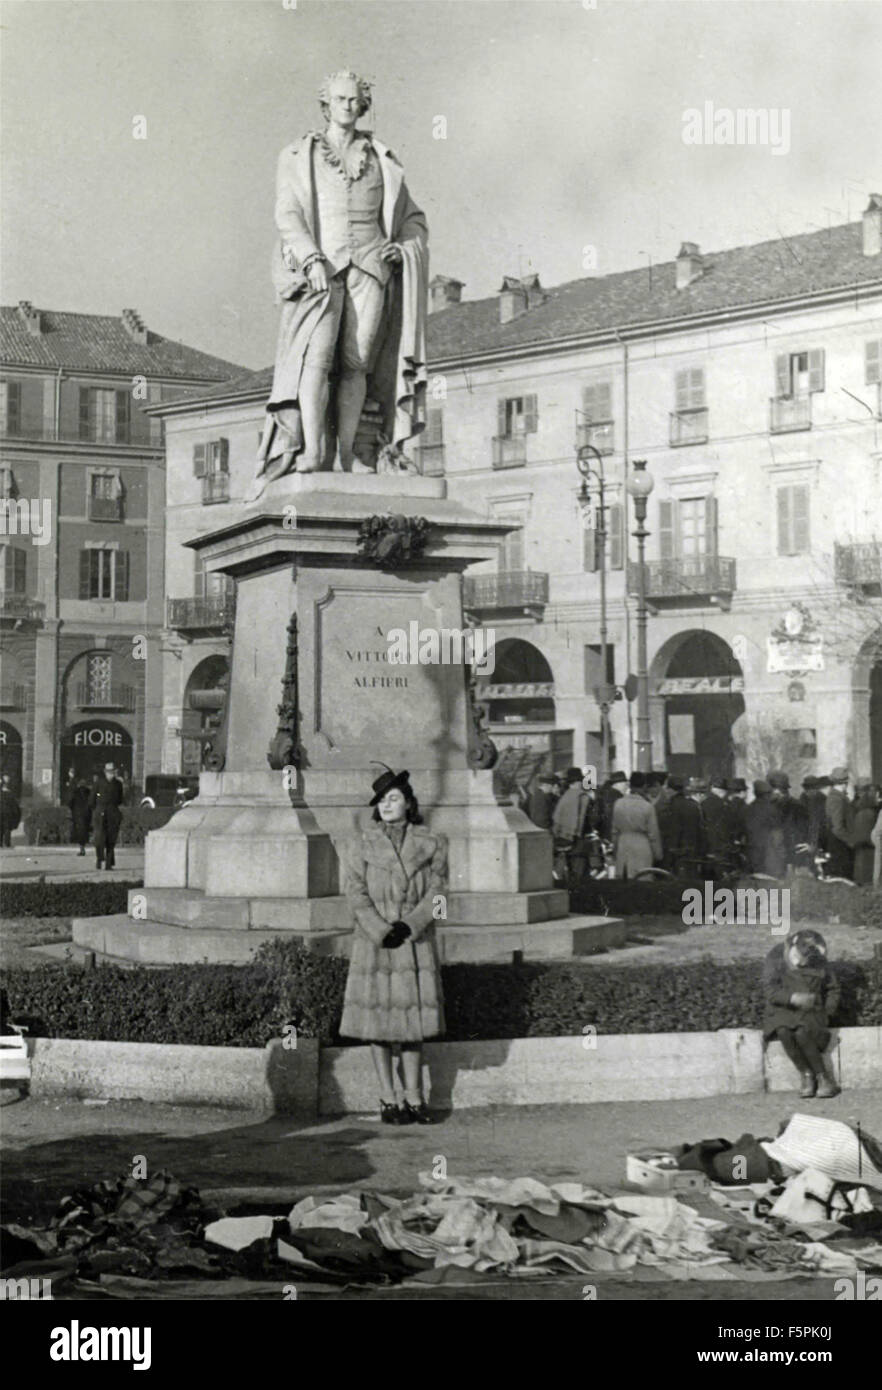 A woman in front of the monument to Vittorio Alfieri, Asti, Italy Stock Photo